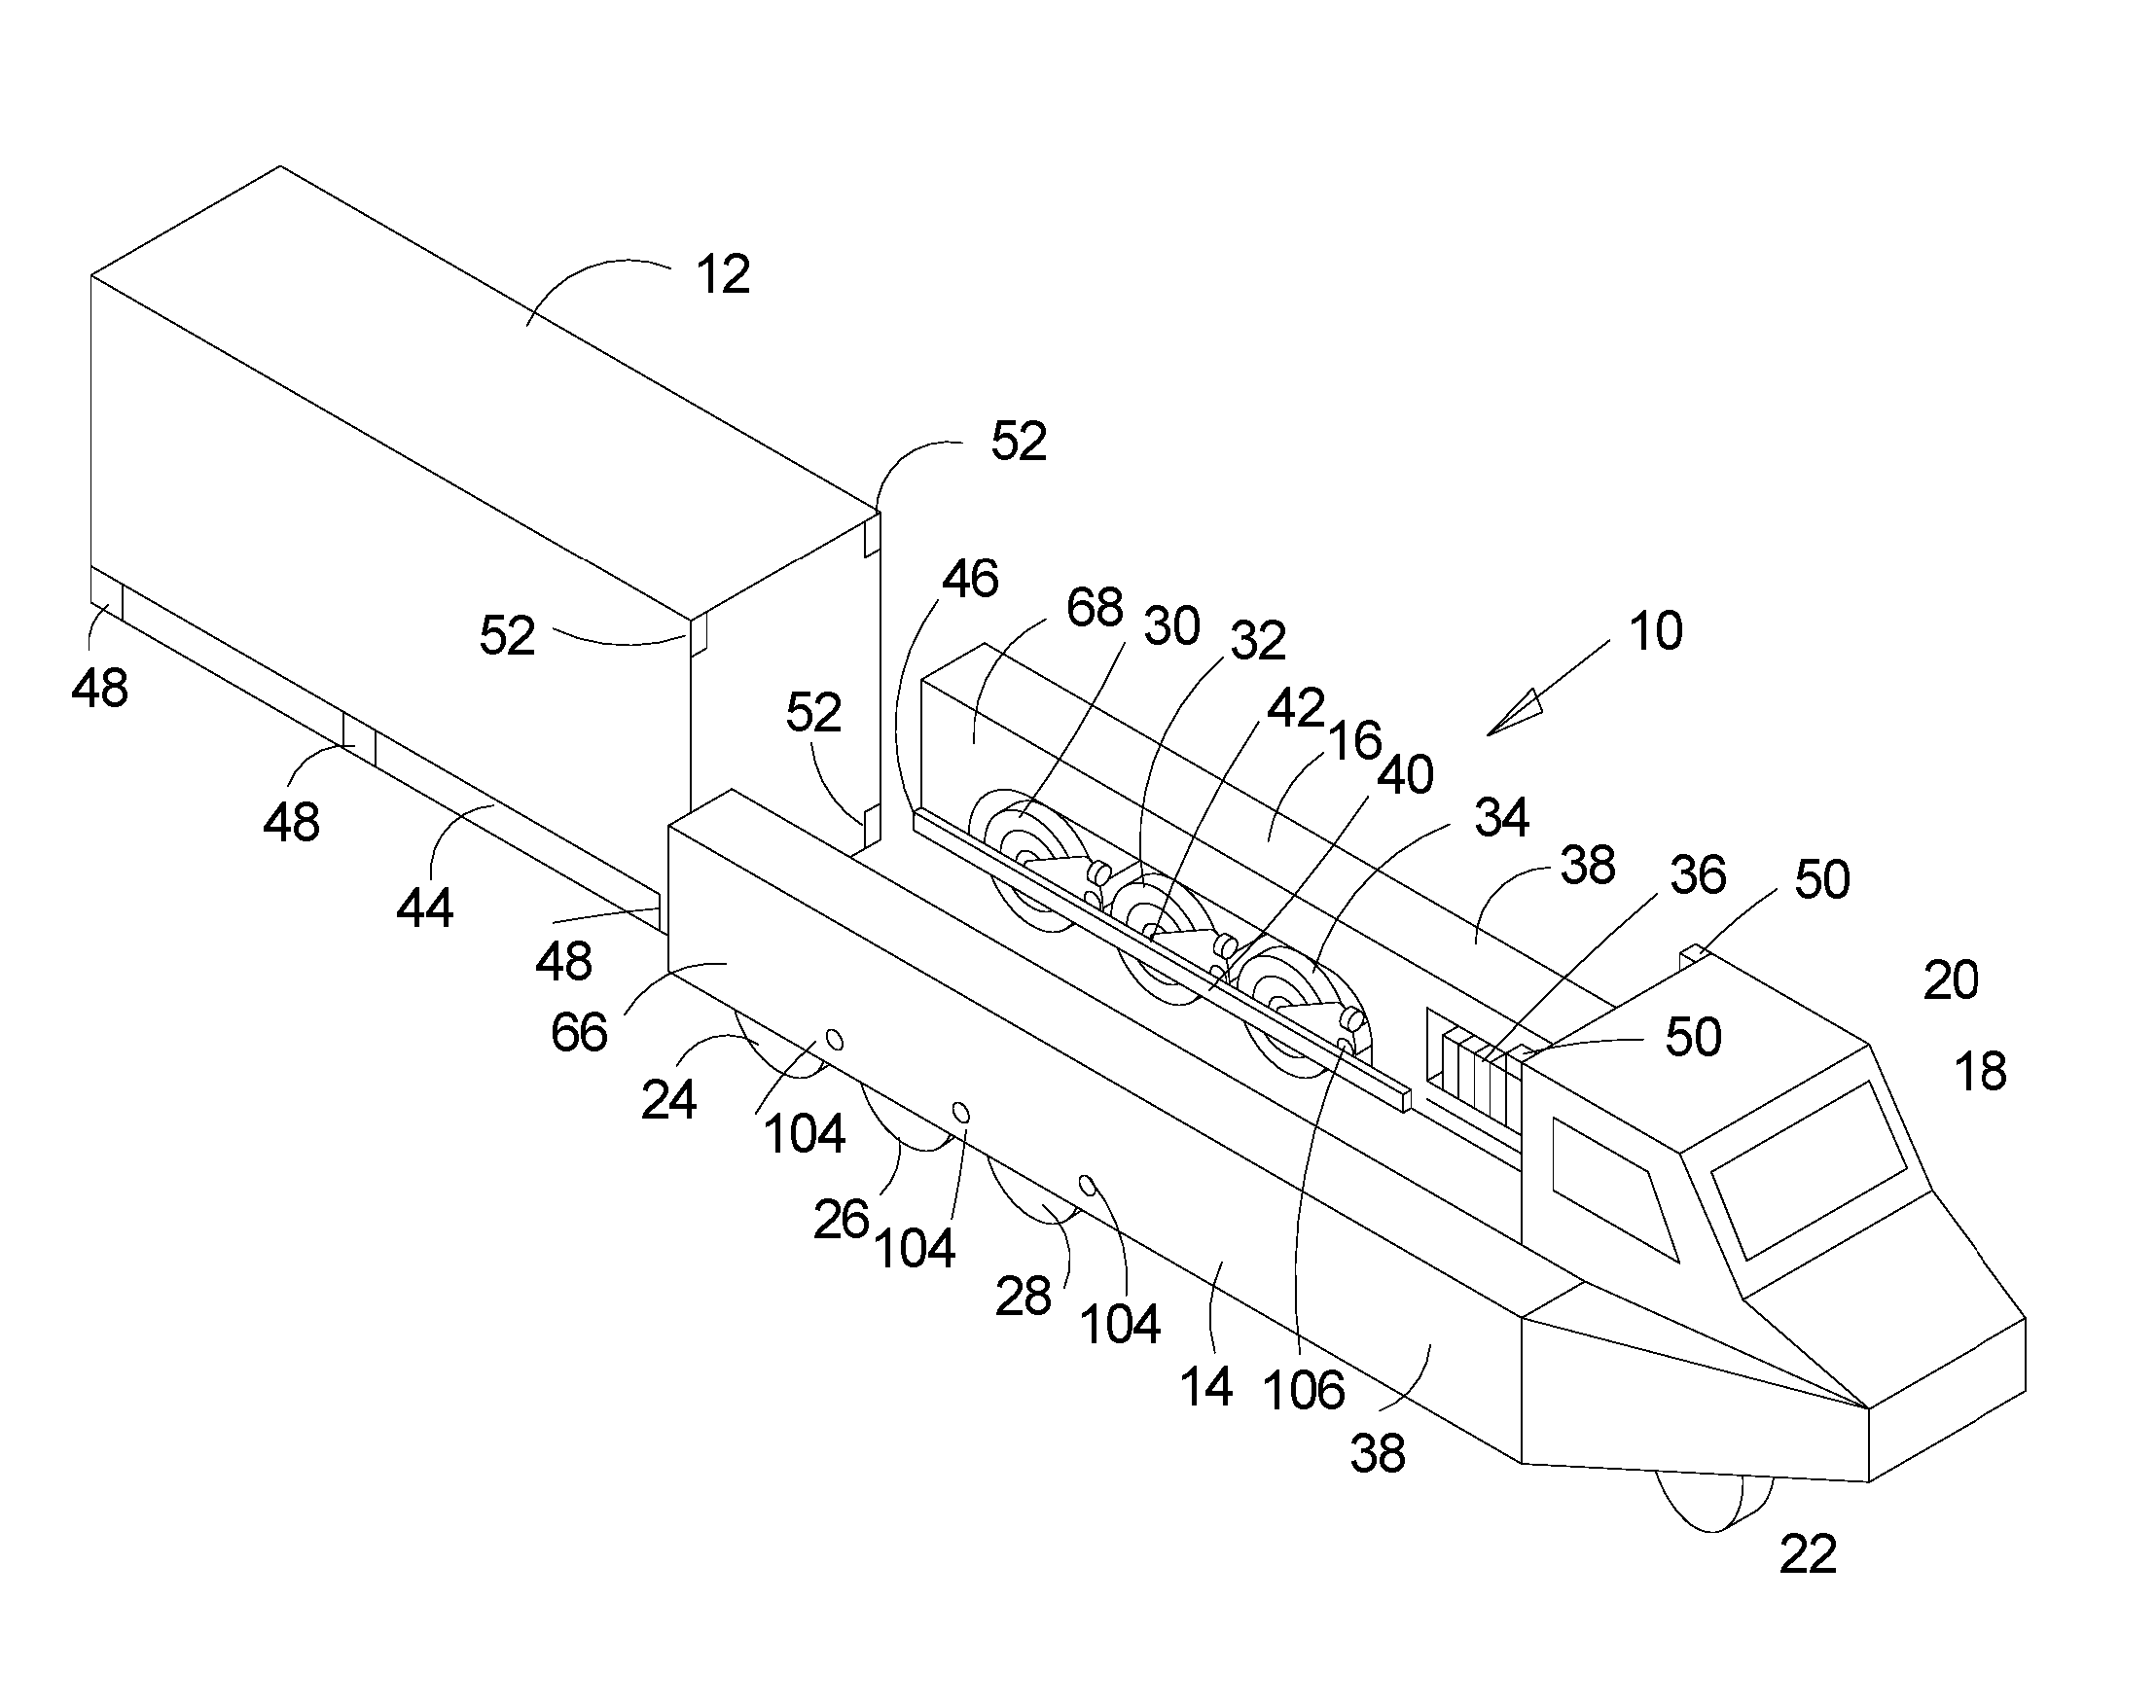 Self-Loading Vehicle for Shipping Containers